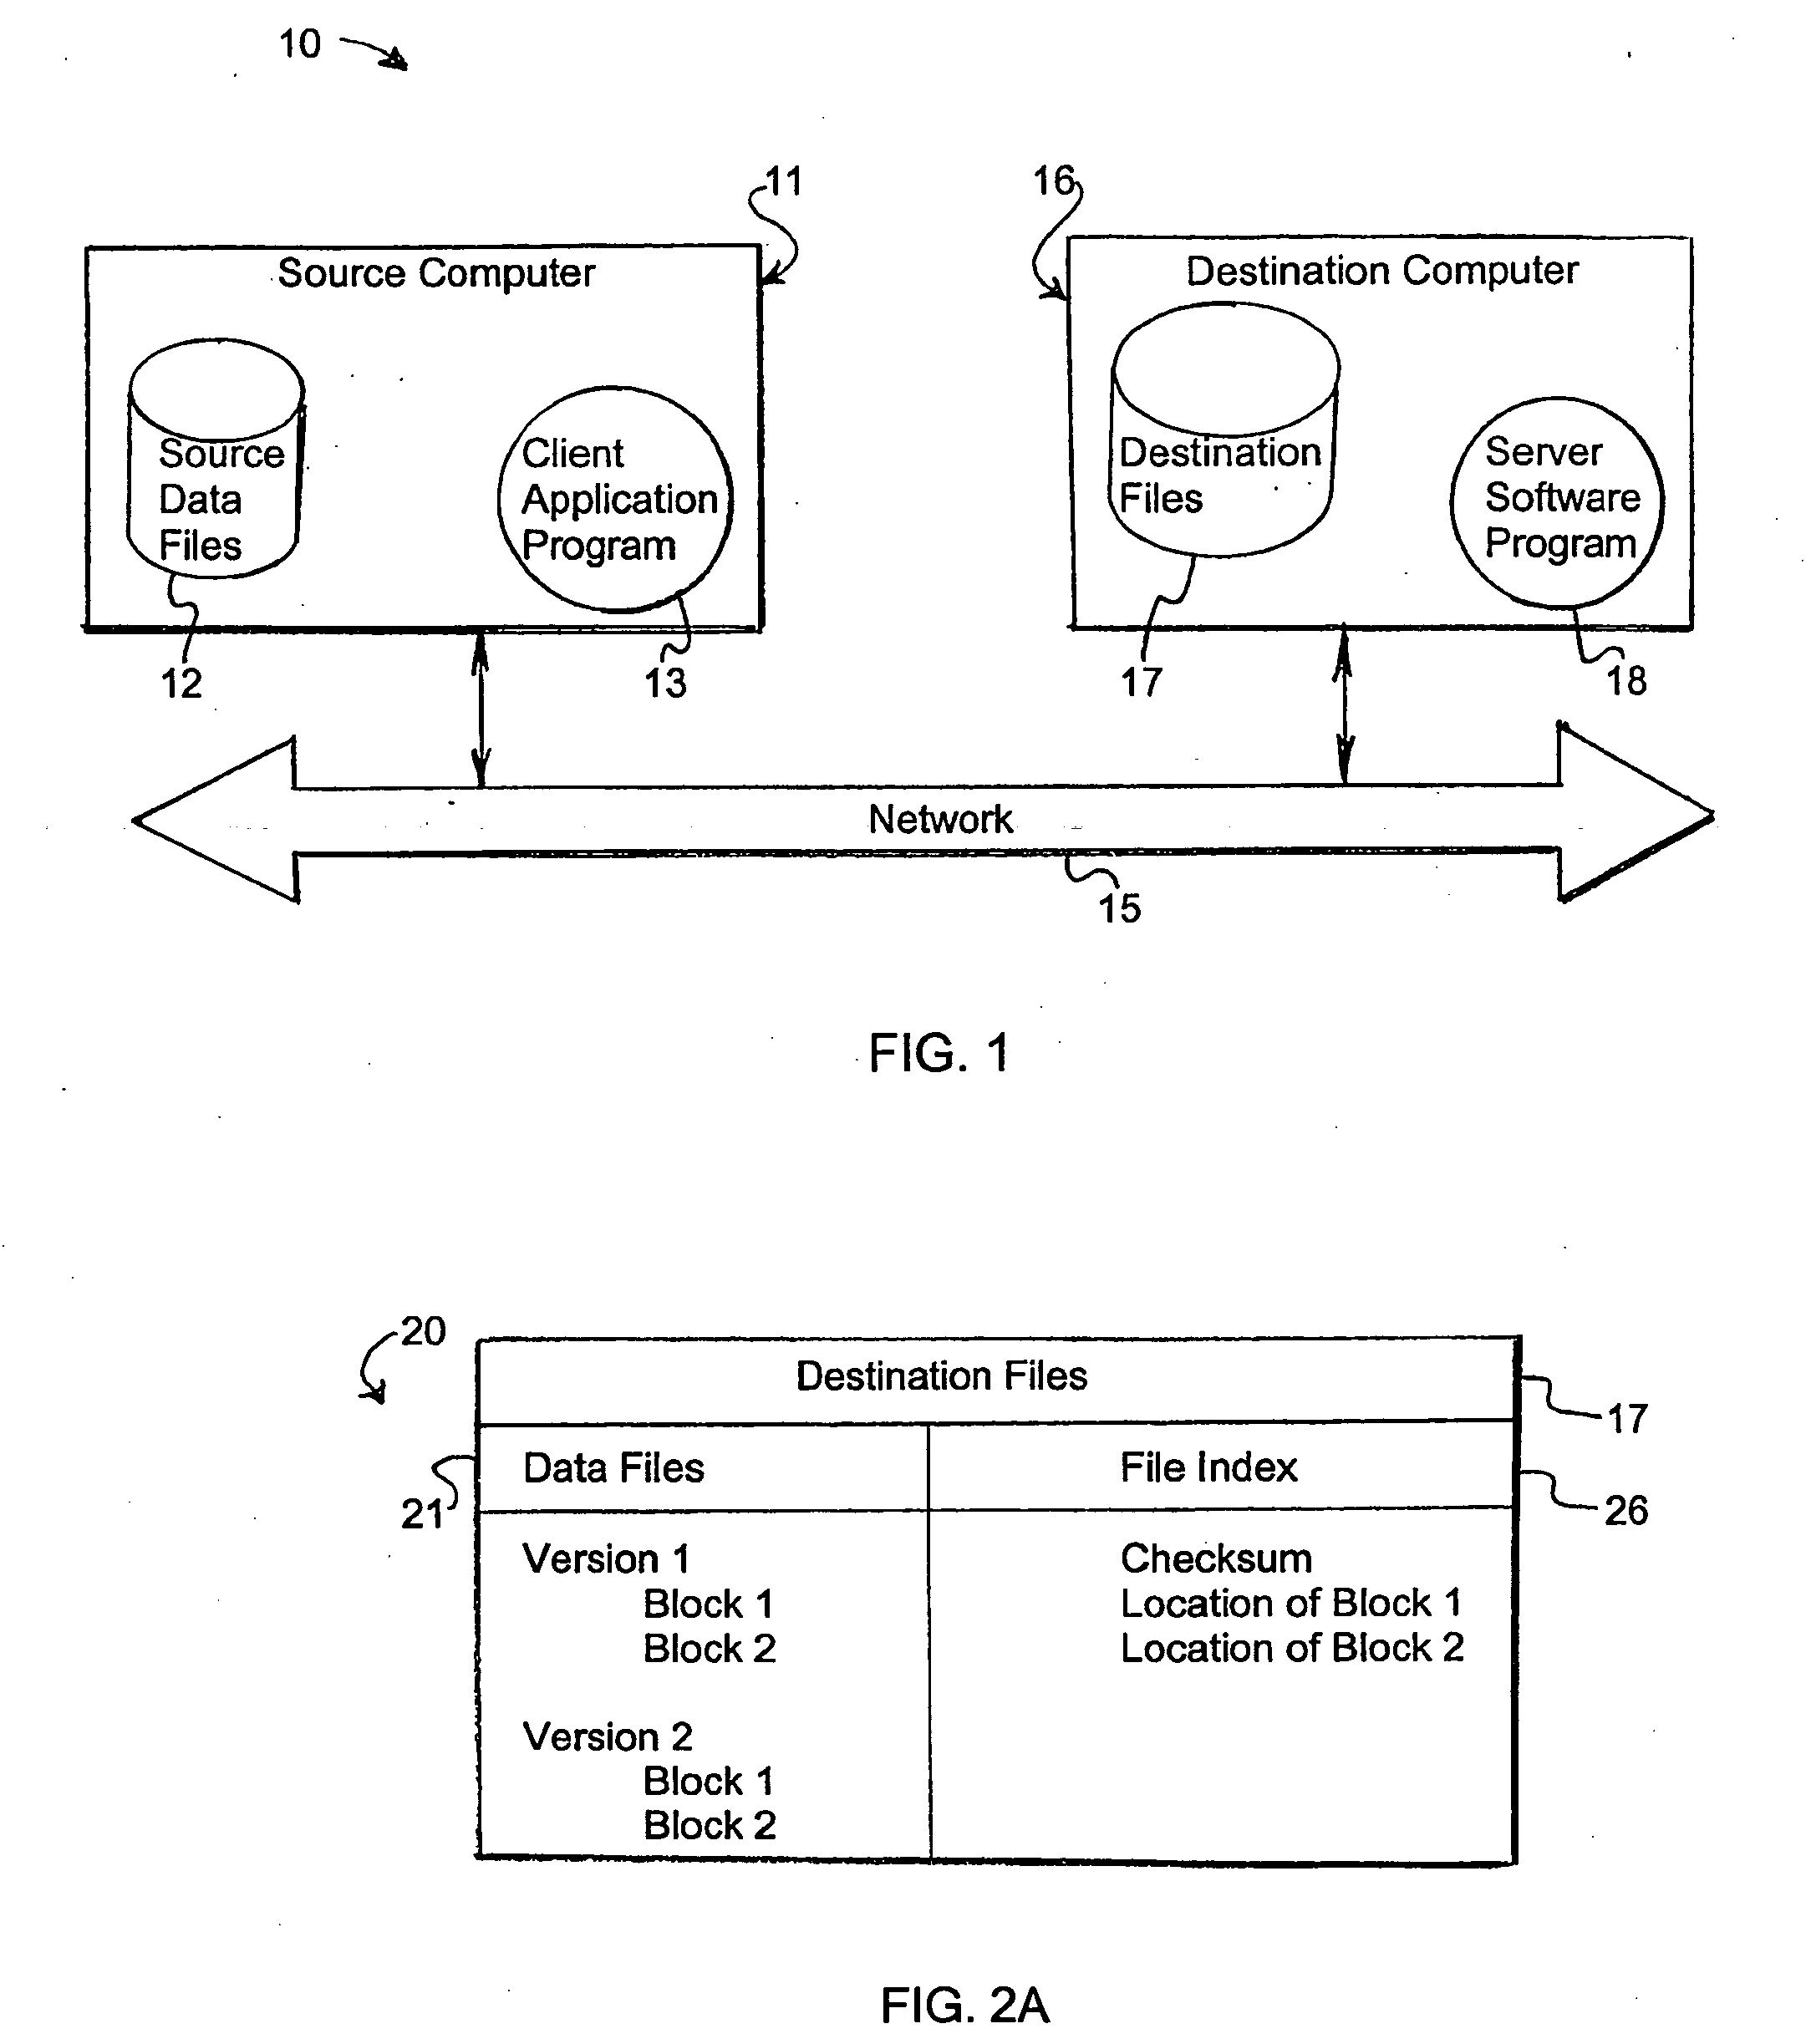 Systems and methods for storing, backing up and recovering computer data files